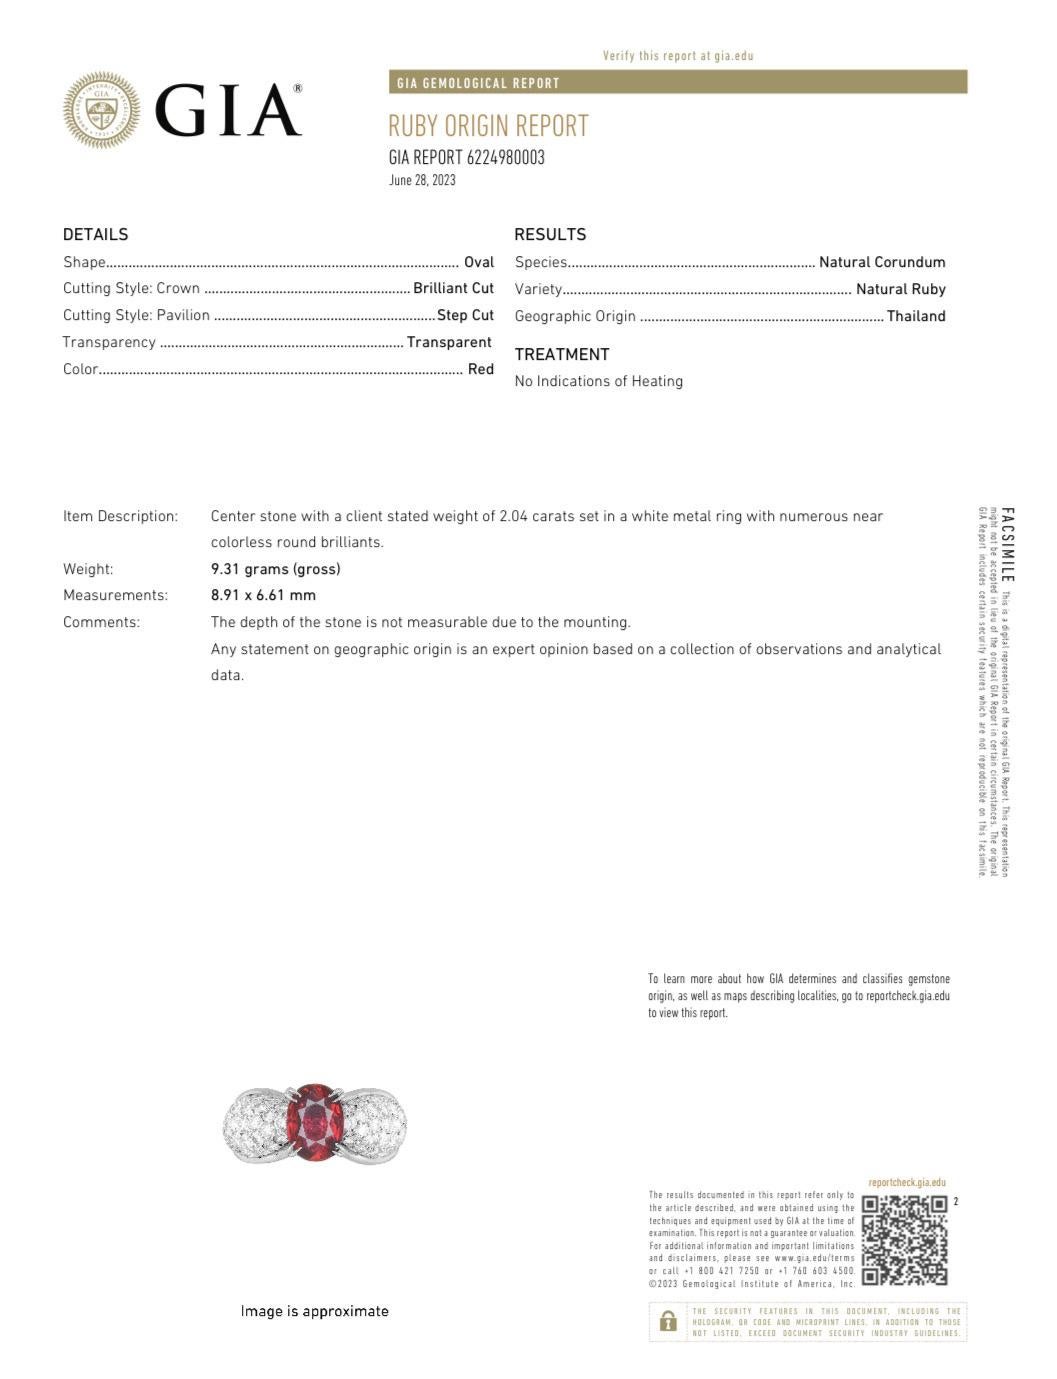 DeKara Designs Collection

Art Deco Inspired Extremely Elegant Vintage Inspired Oval Ruby Diamond Engagement Ring.

Metal- 90% Platinum, 10% Iridium.

Ring Comes With GIA Certificate.
GIA Report Number 6224980003

Stones- Genuine No Heat Oval Ruby,